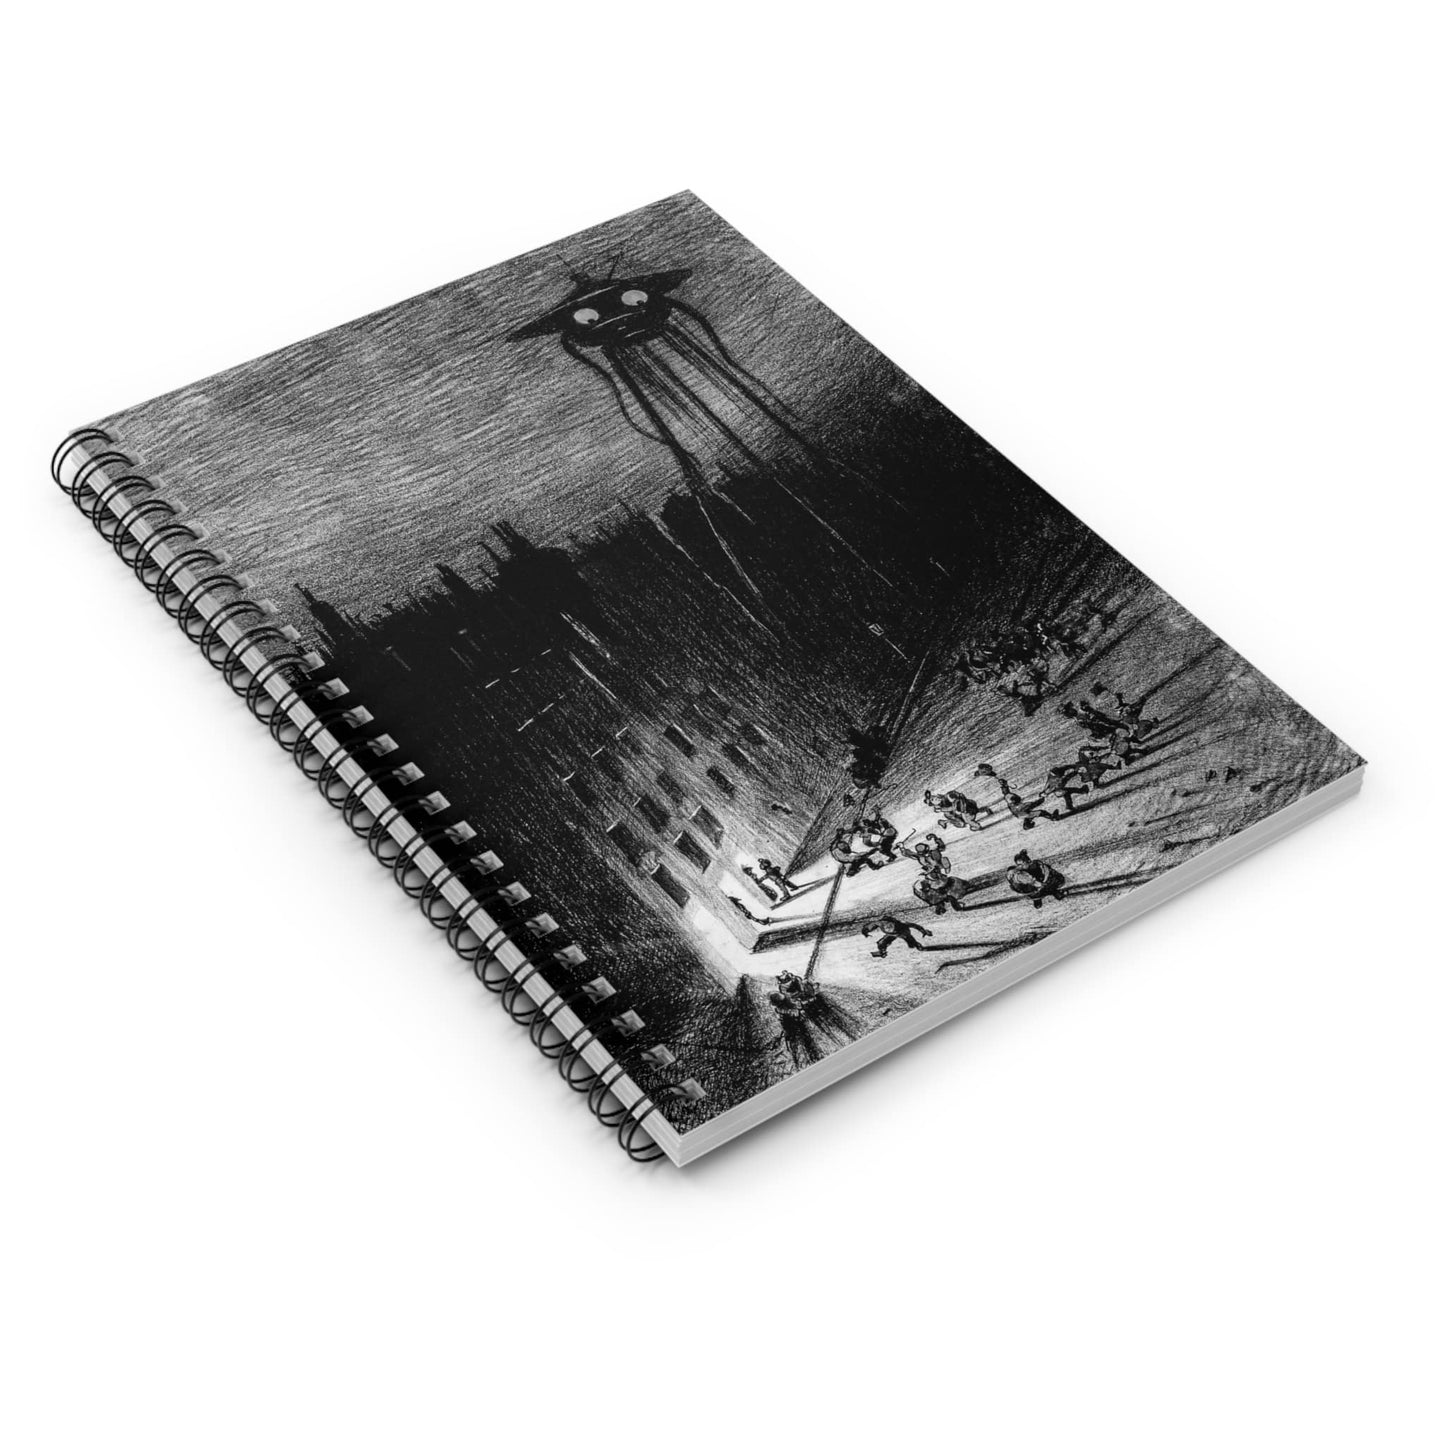 Funny Alien Spiral Notebook Laying Flat on White Surface